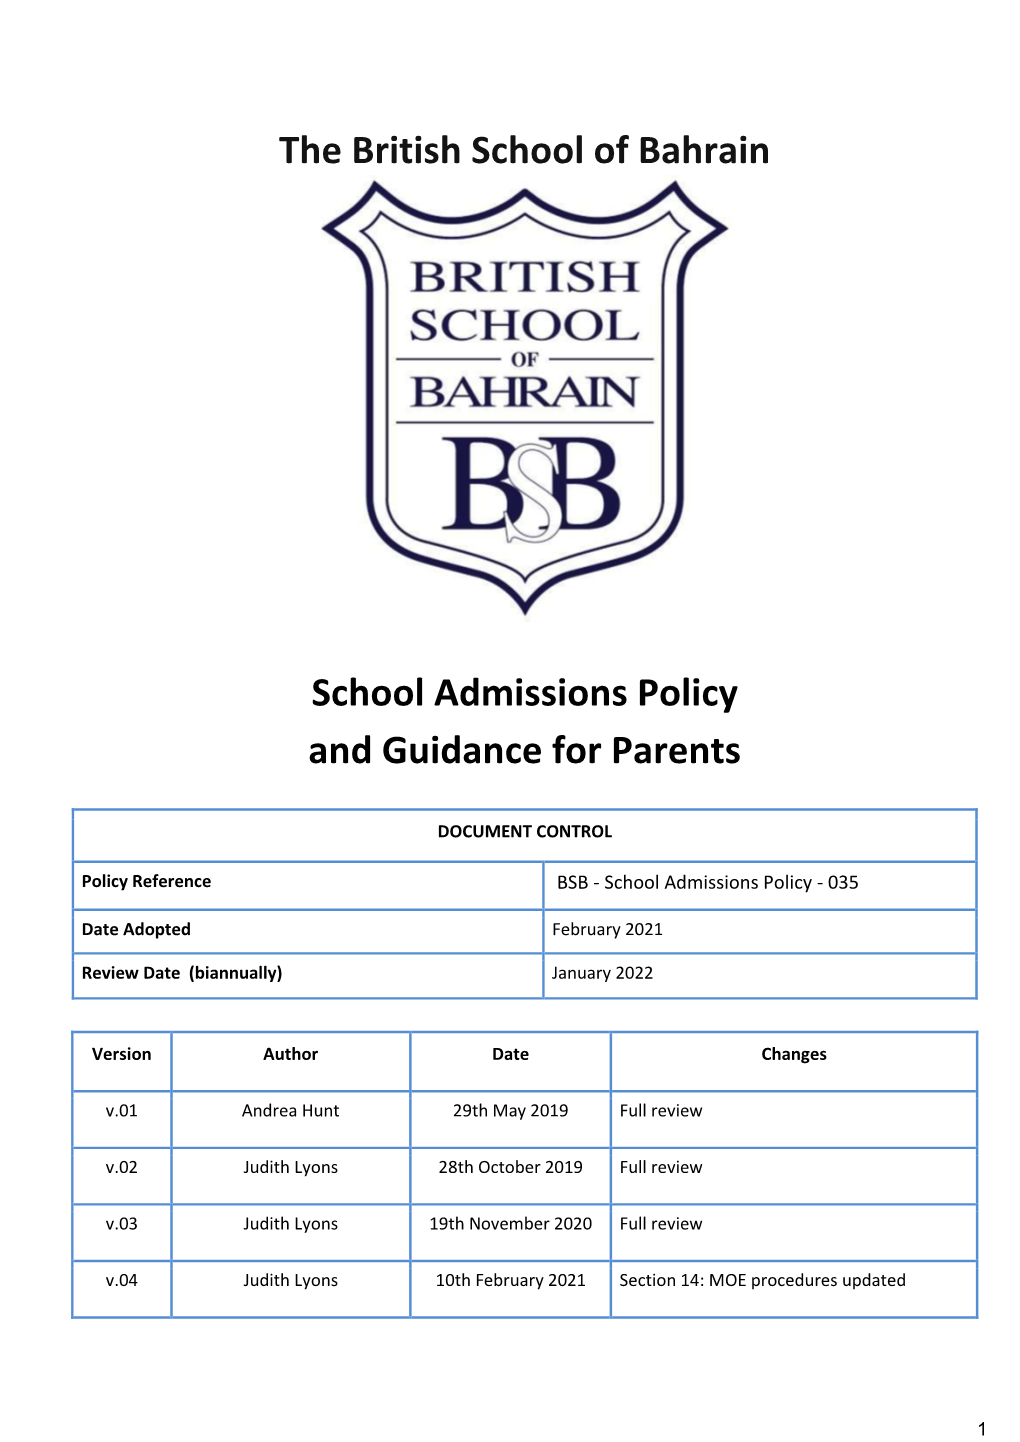 The British School of Bahrain School Admissions Policy and Guidance for Parents